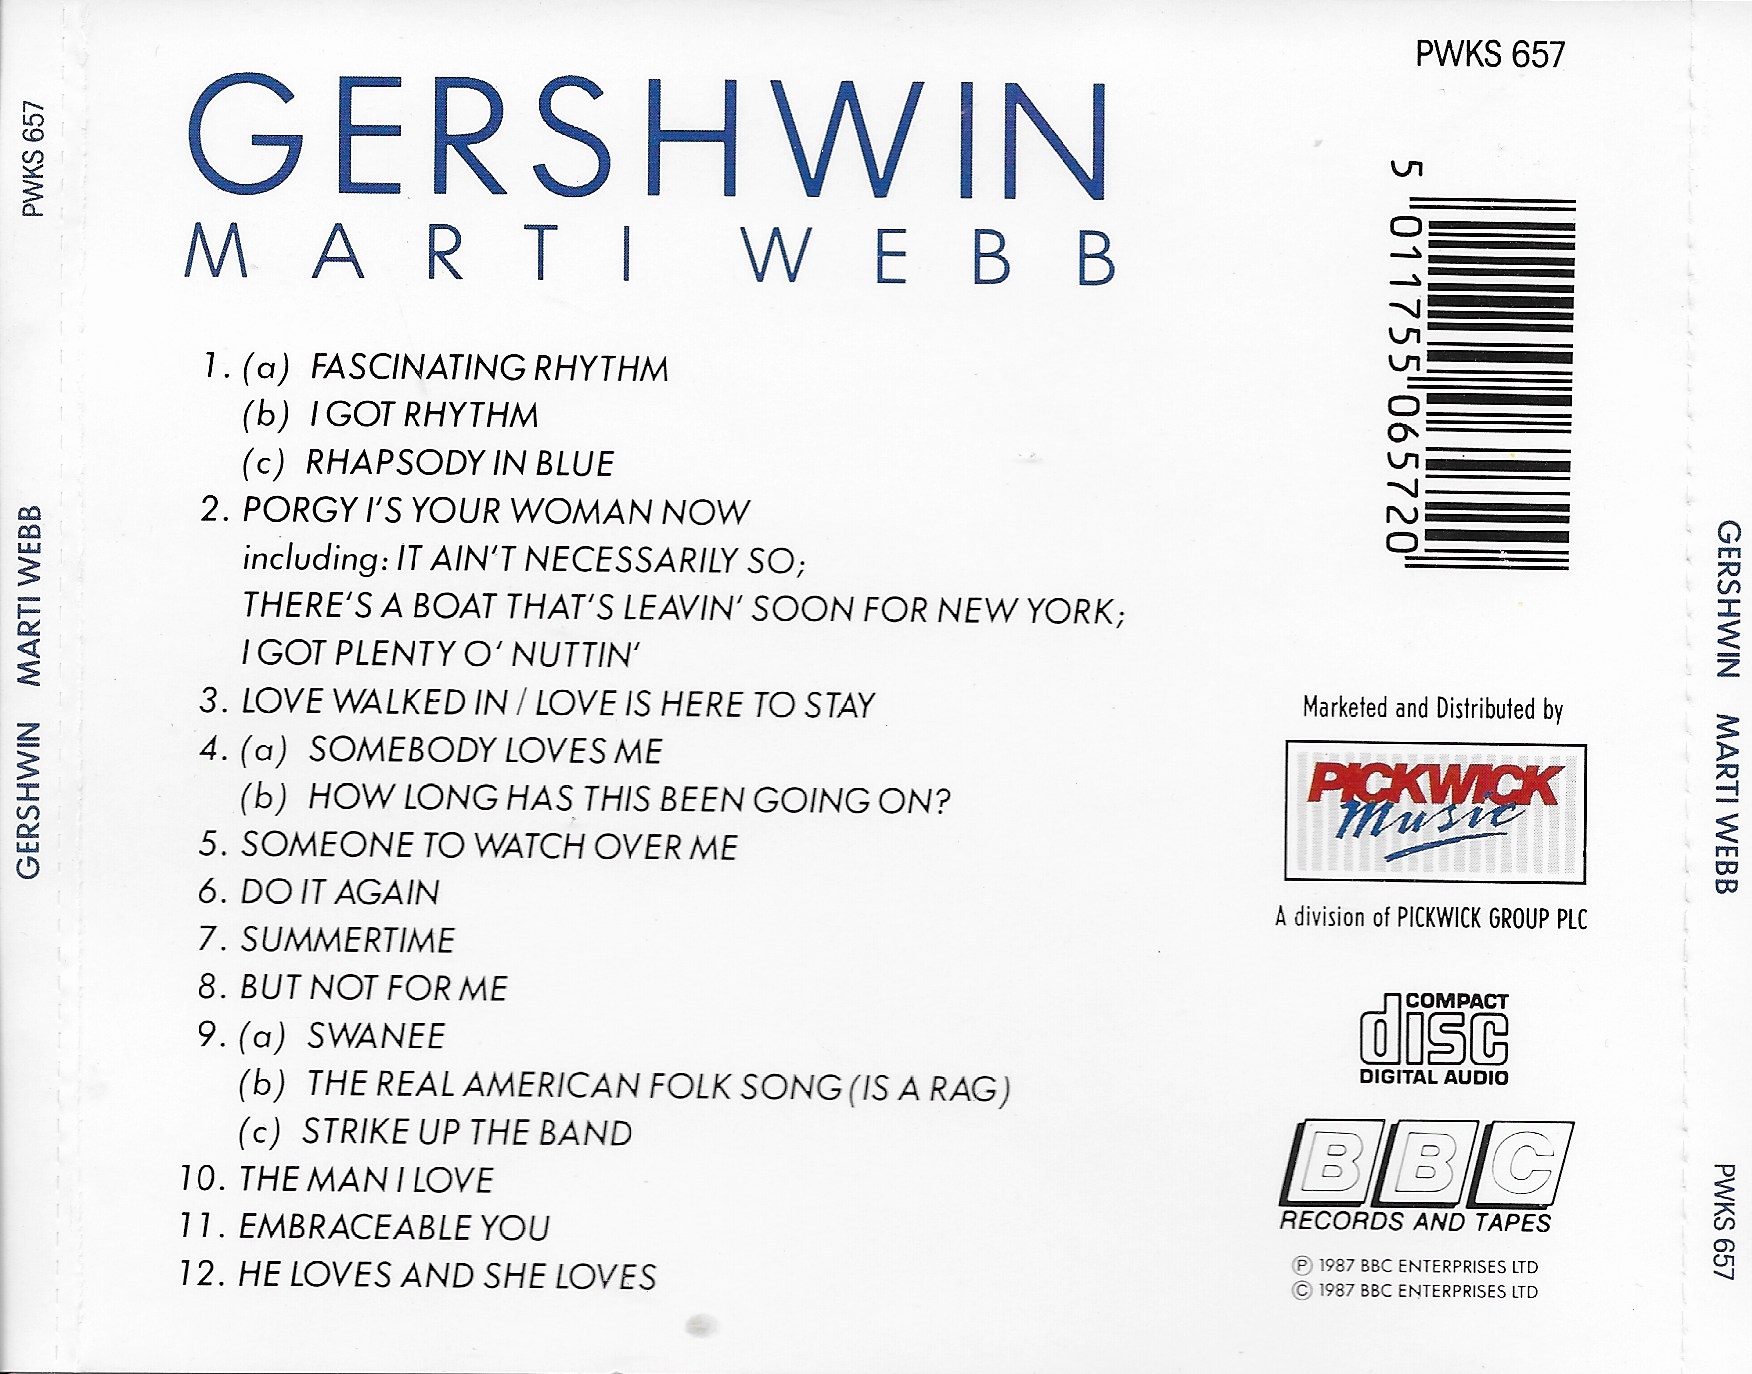 Picture of PWKS 657 Marti Webb sings Gershwin by artist Gershwin / Marti Webb  from the BBC records and Tapes library